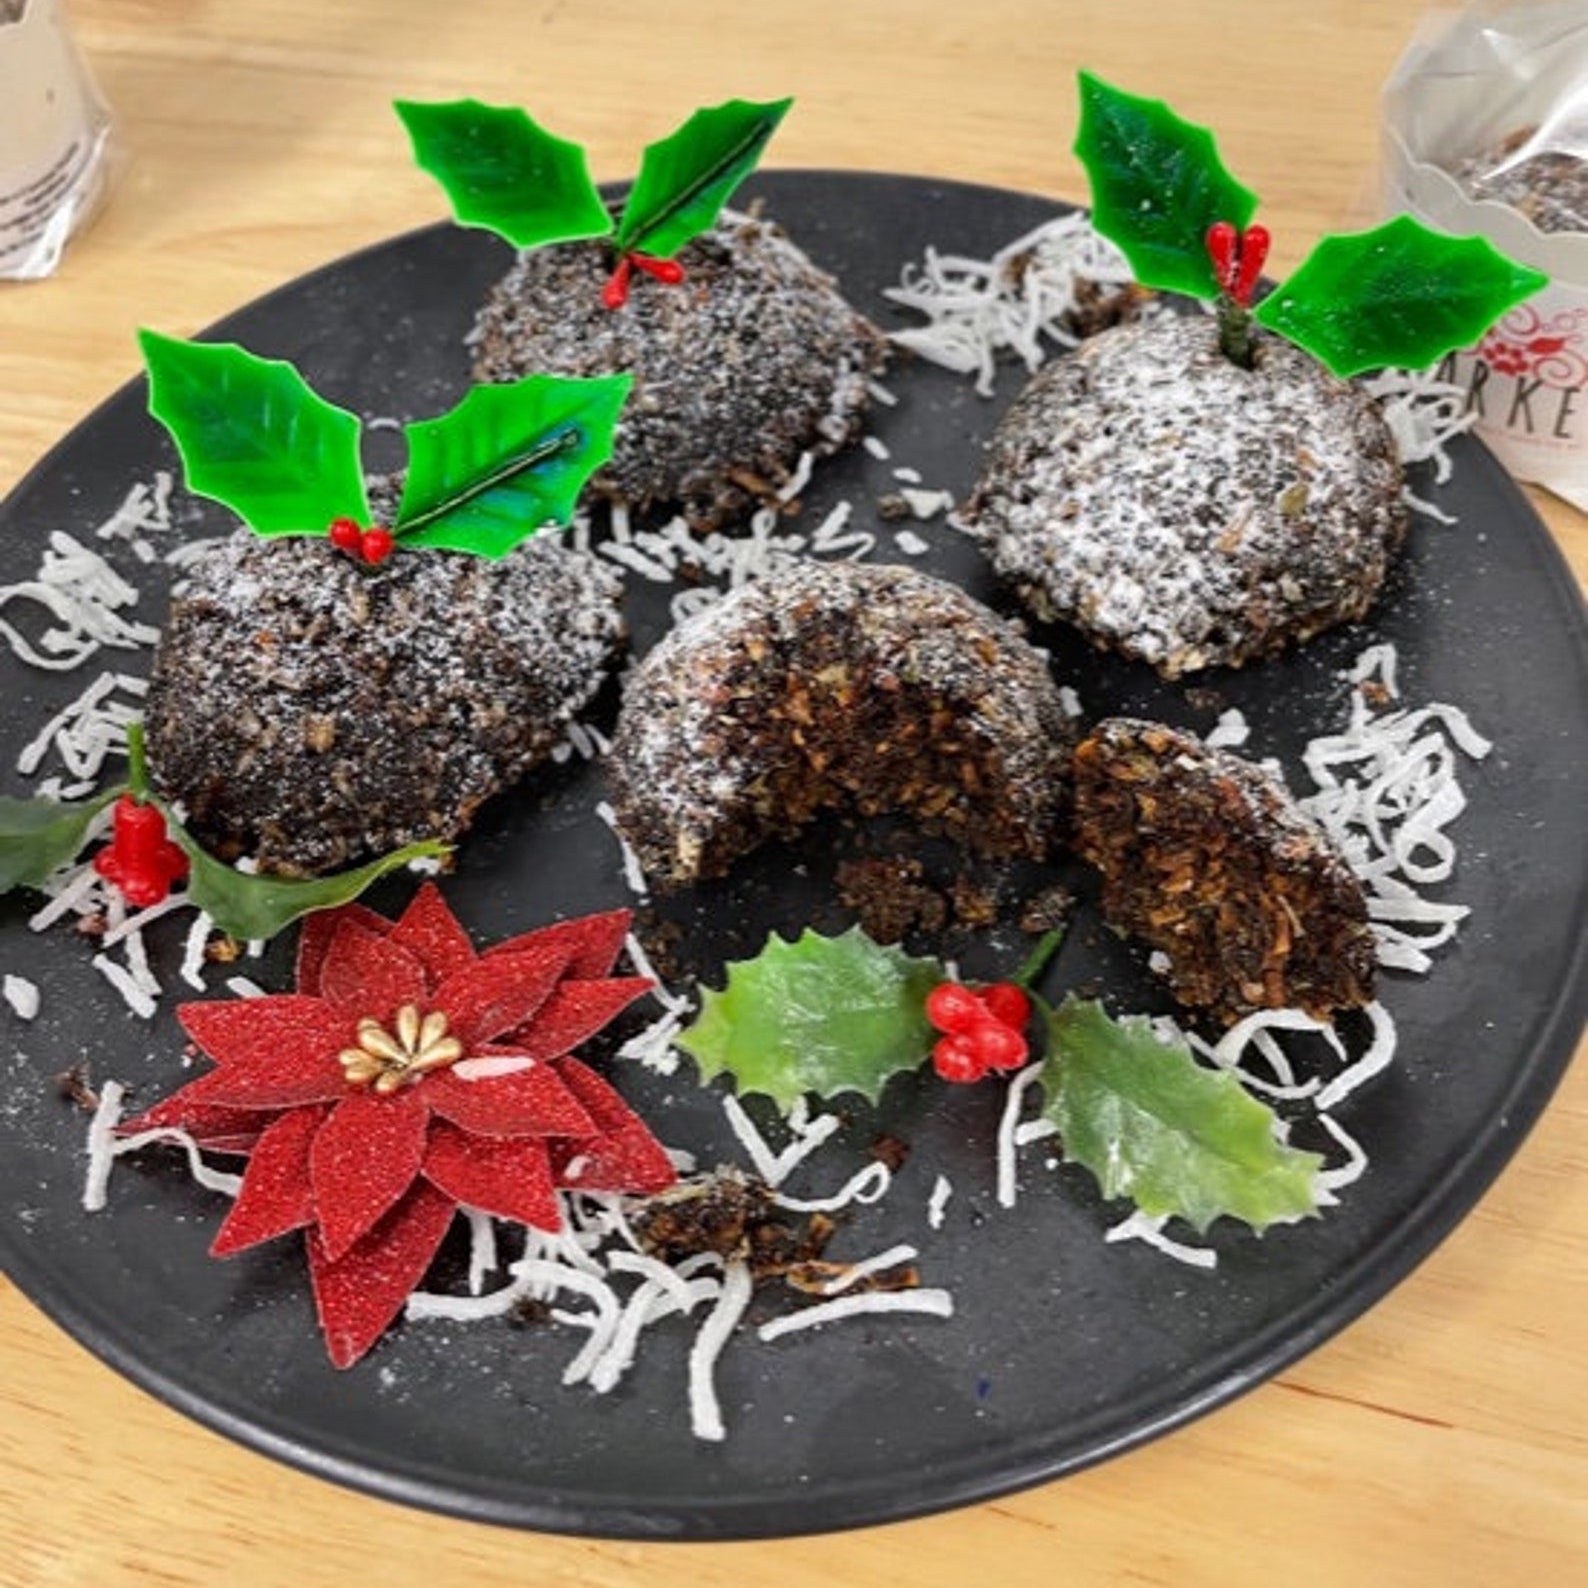 L'BARKERY - Pawding's Doggie Christmas Pudding